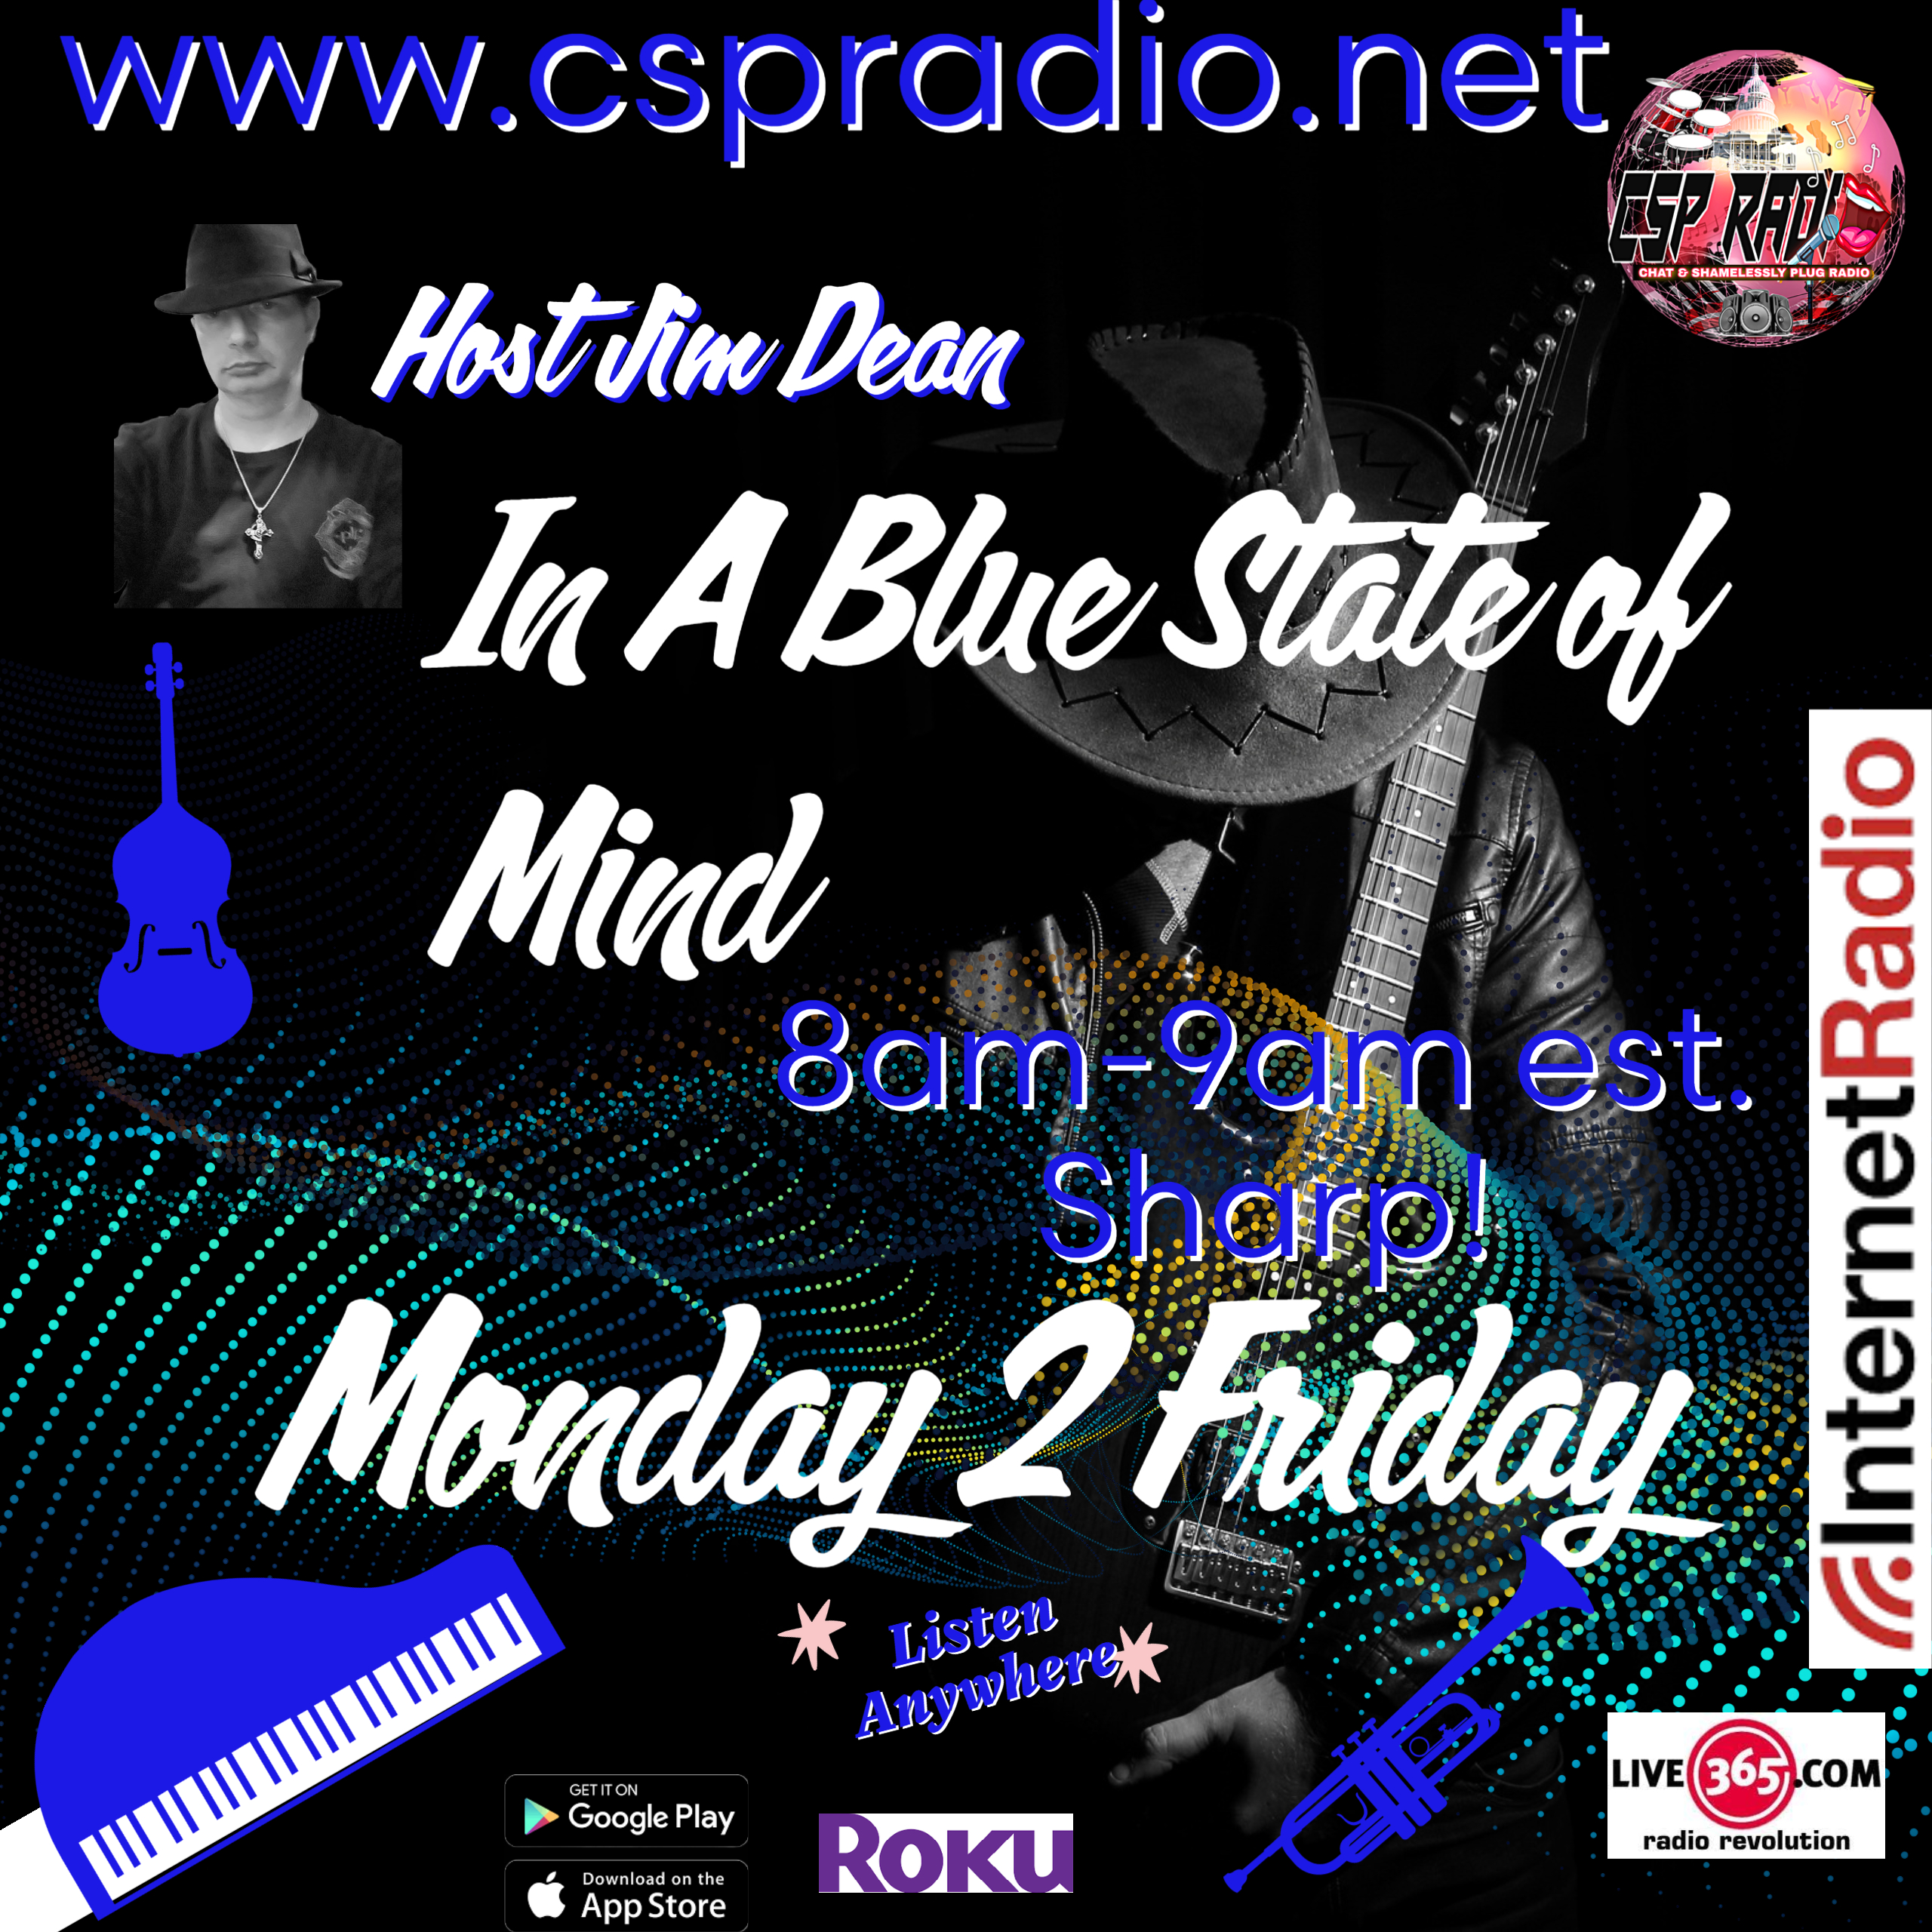 Art for Blue State of Mind week 01/30/2023 by Host Jim Blue